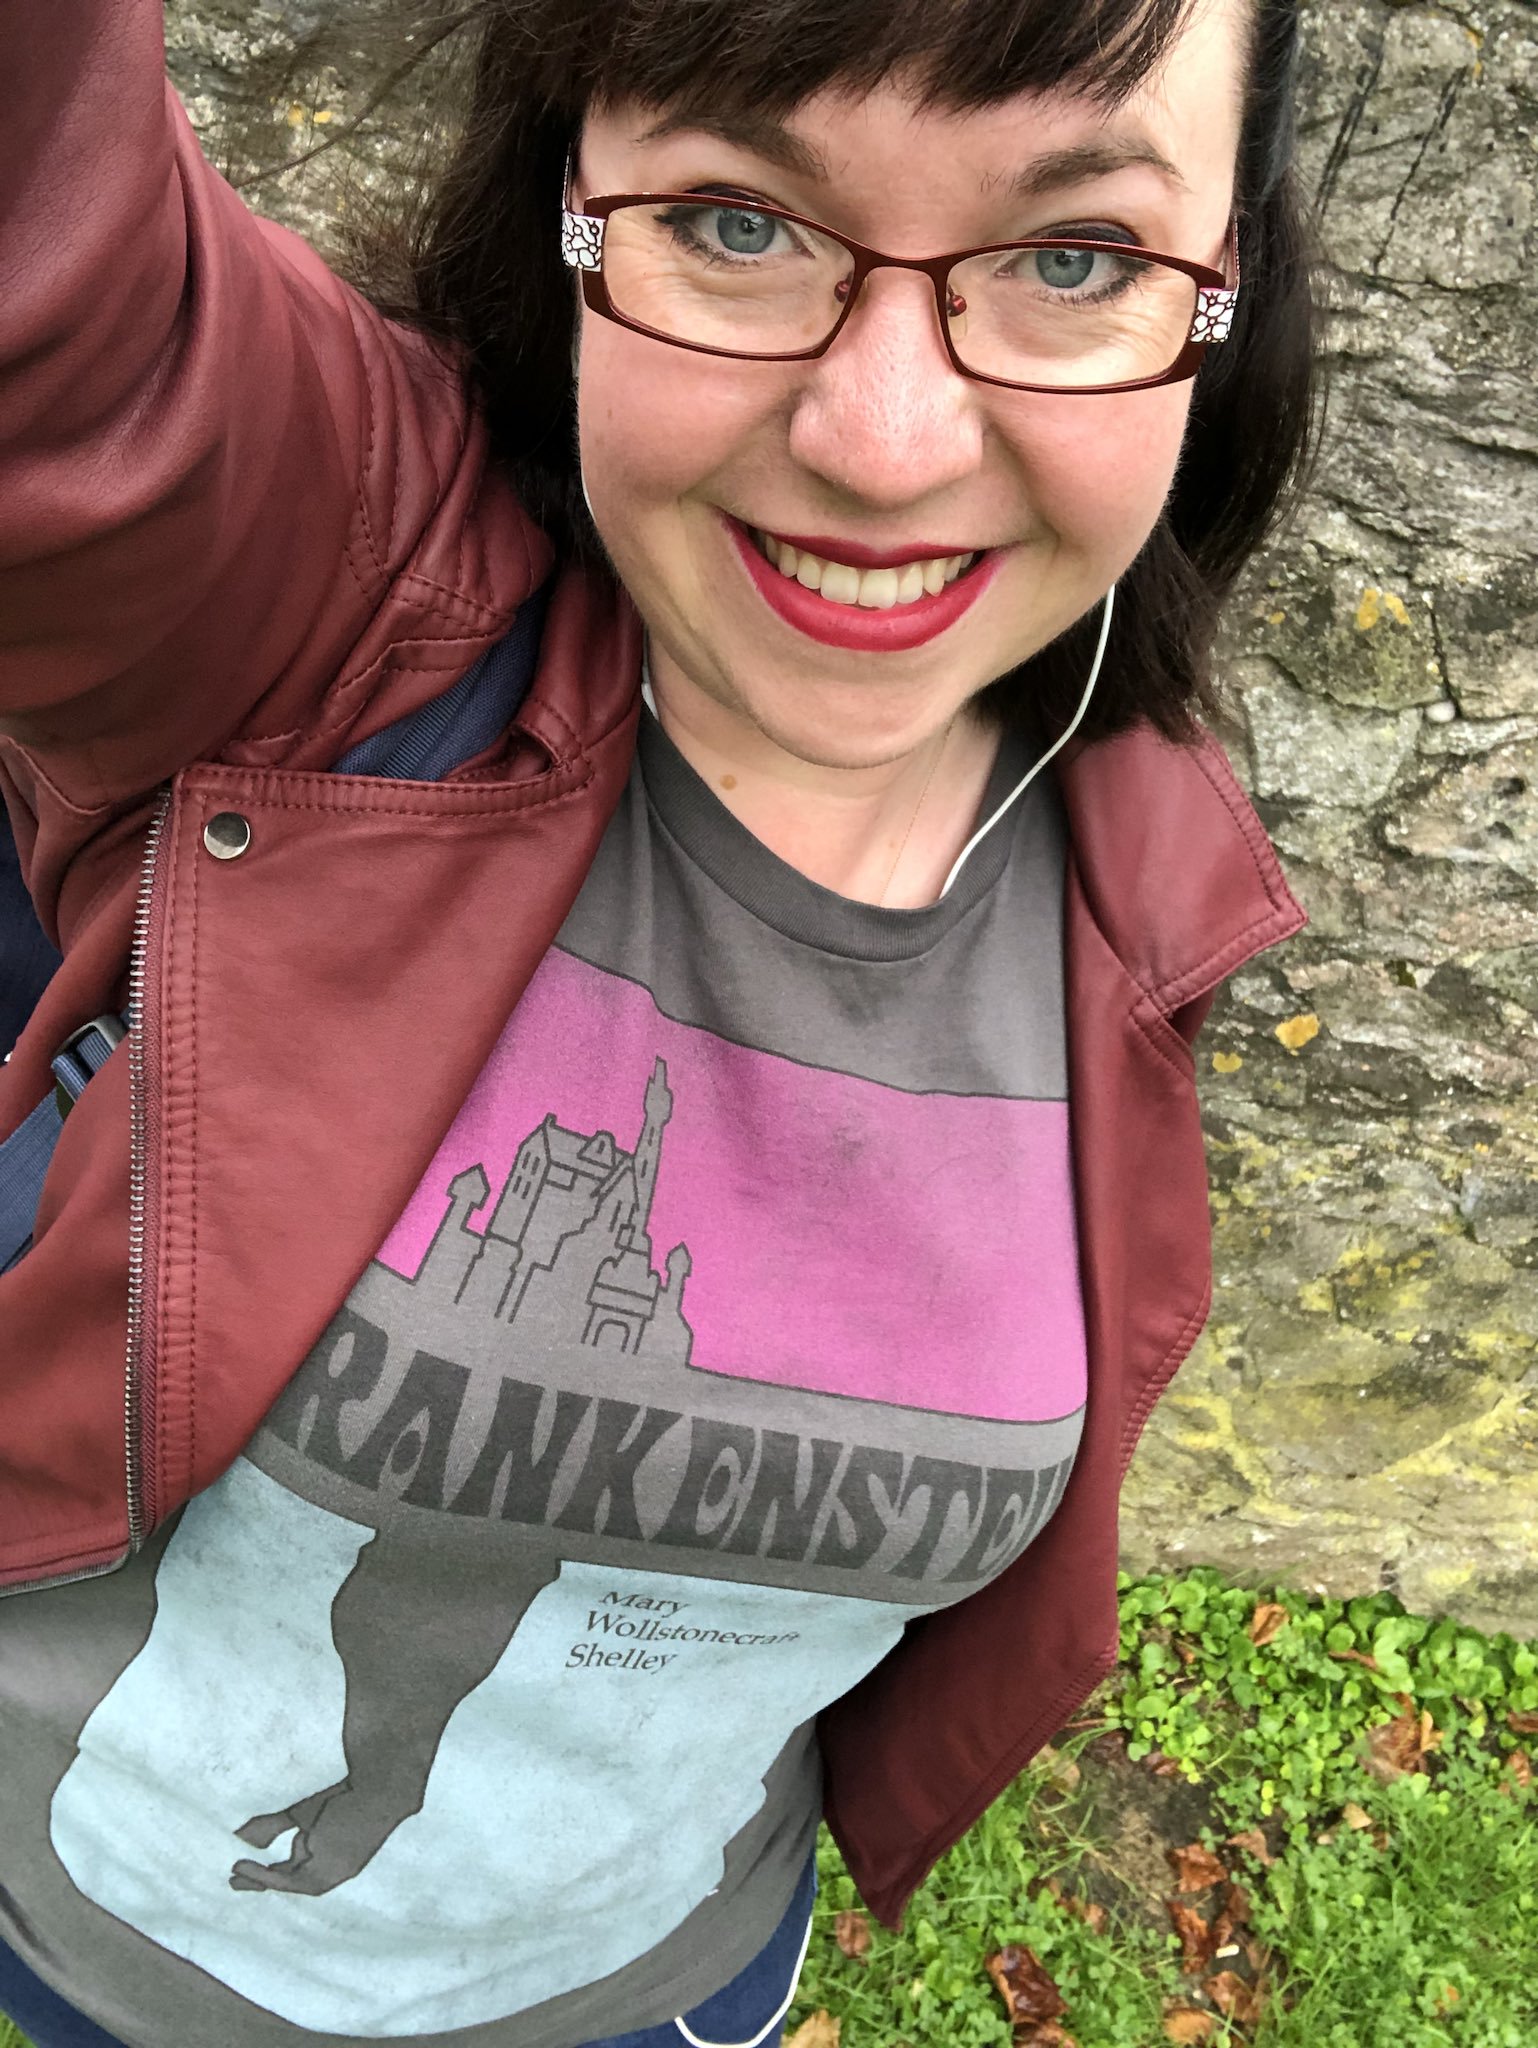 For #AdaLovelaceDay I’m wearing a shirt in honour of the first sci-fi writer: Mary Wollstonecraft Shelley! #womeninSTEM #ALD17 https://t.co/uULFYdc3Rn